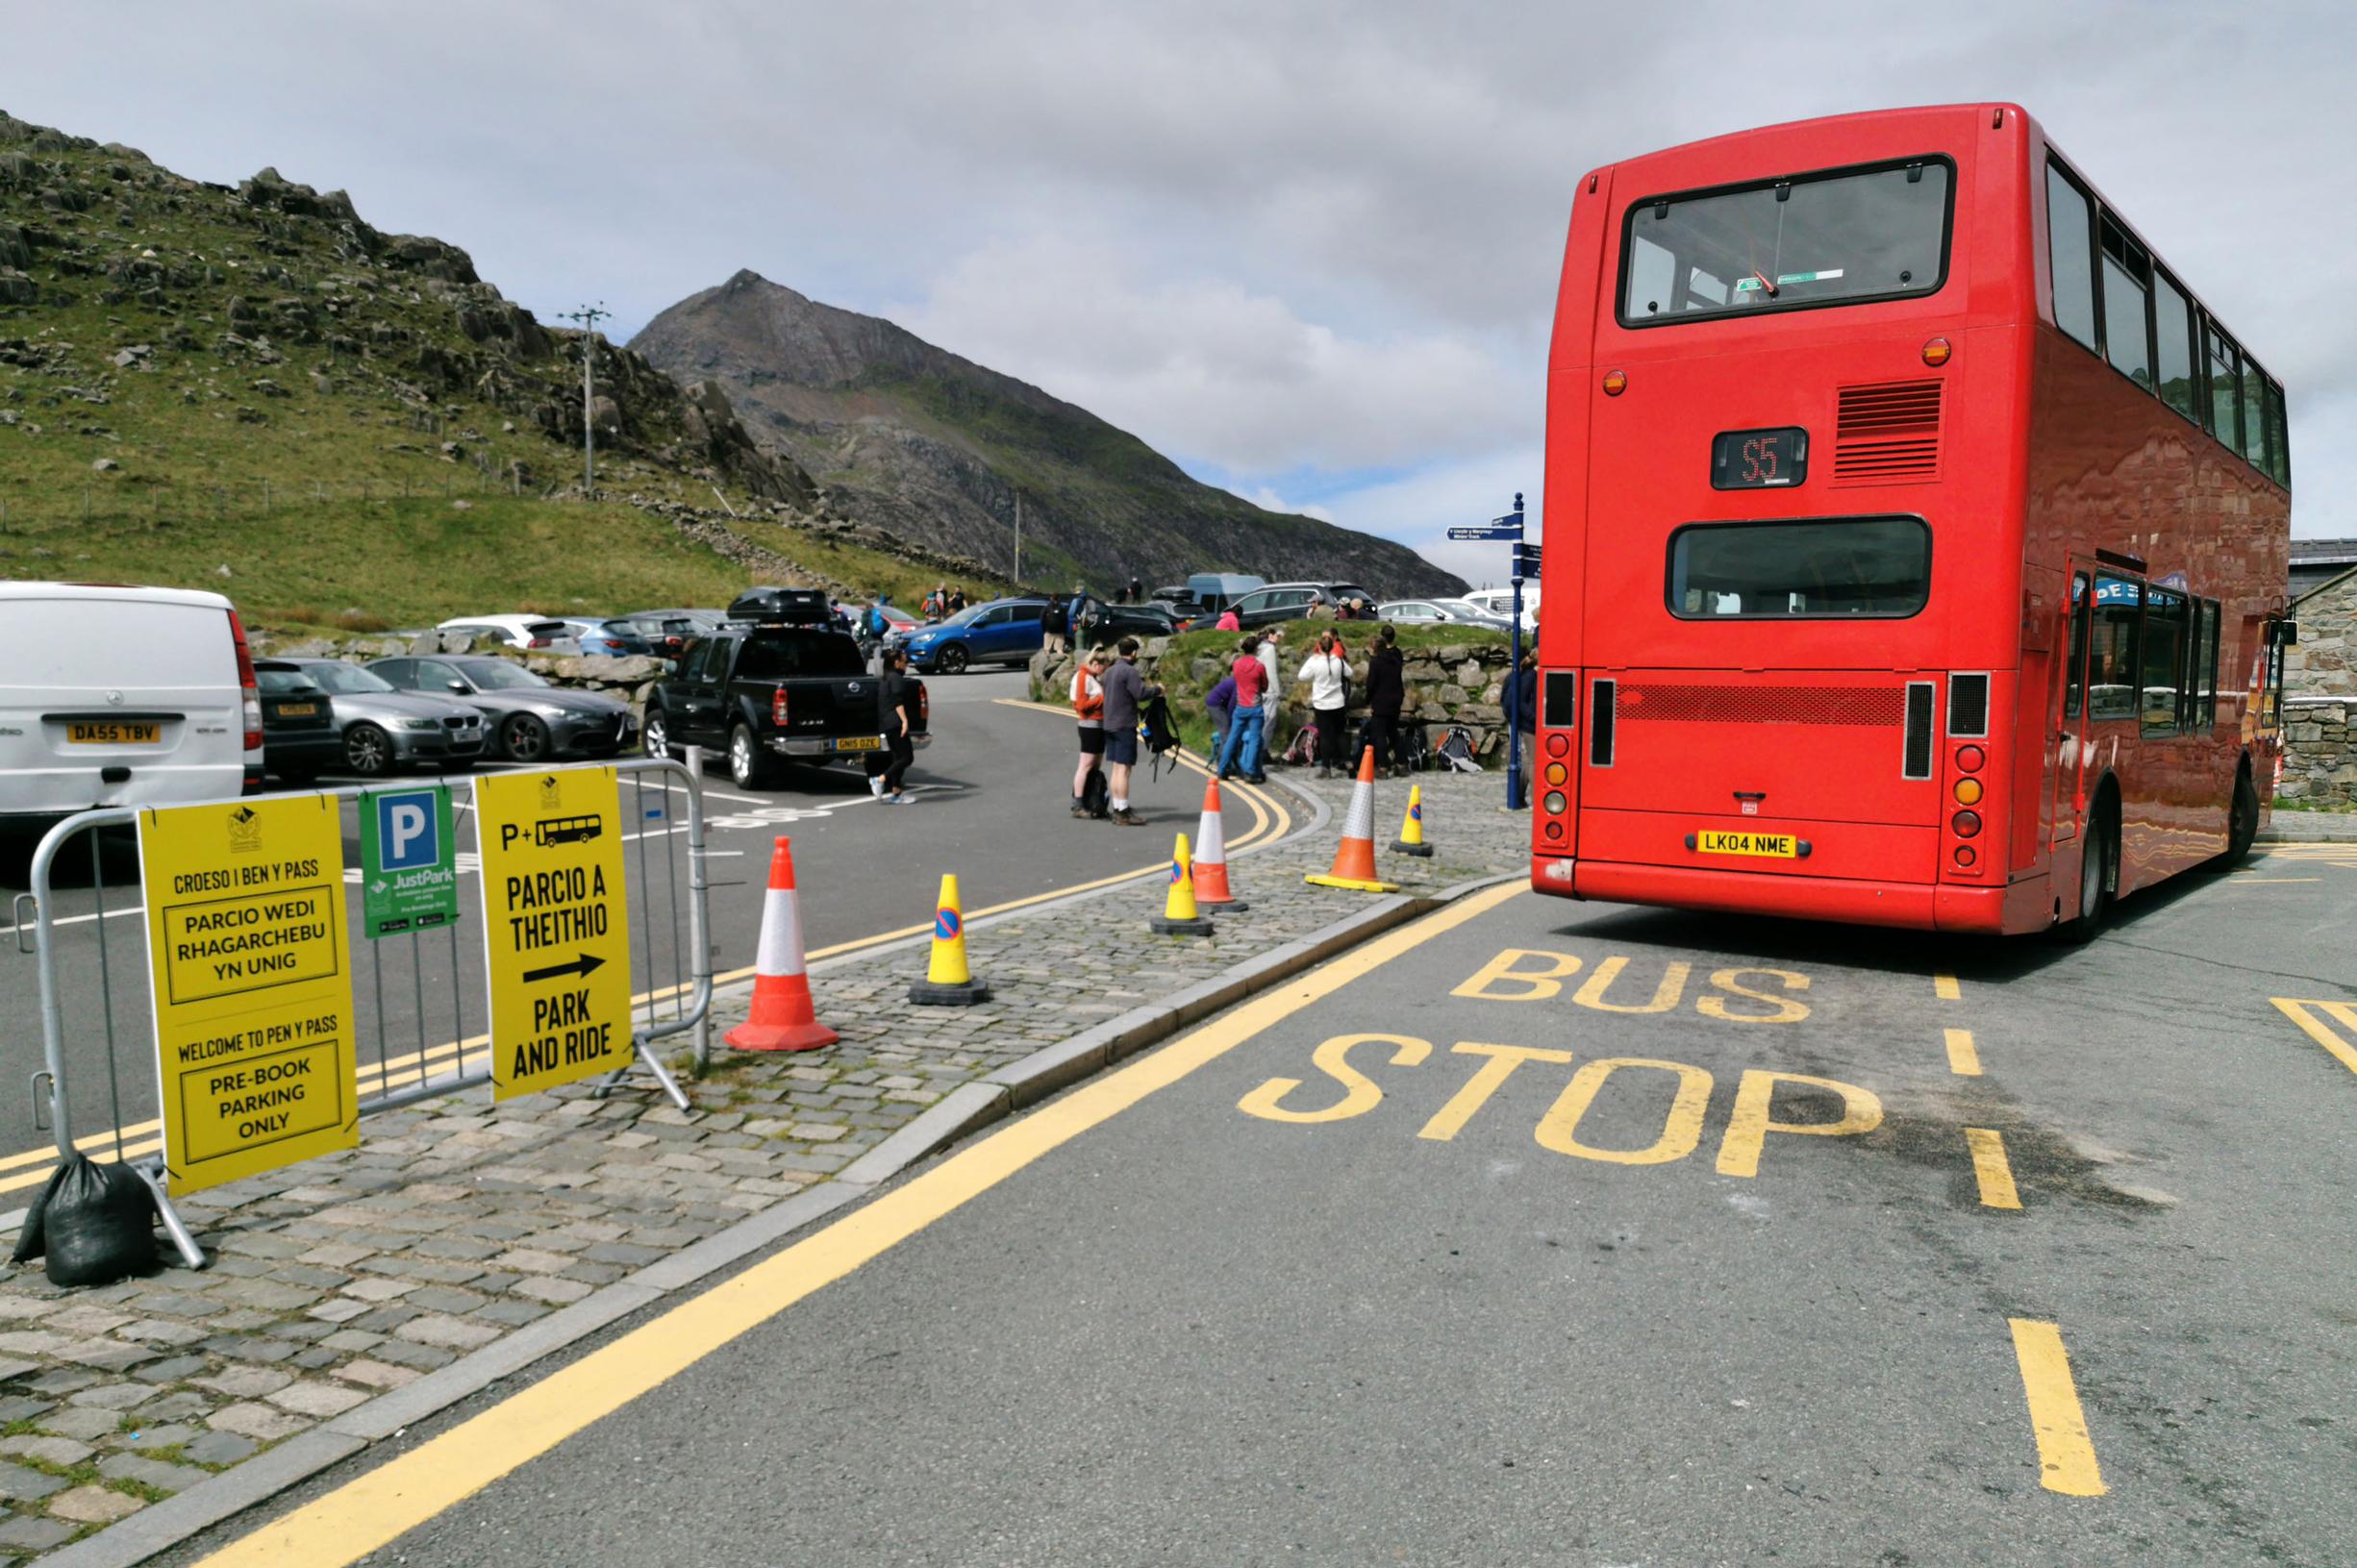 The Pen-y-Pass car park at its Sherpa P&R